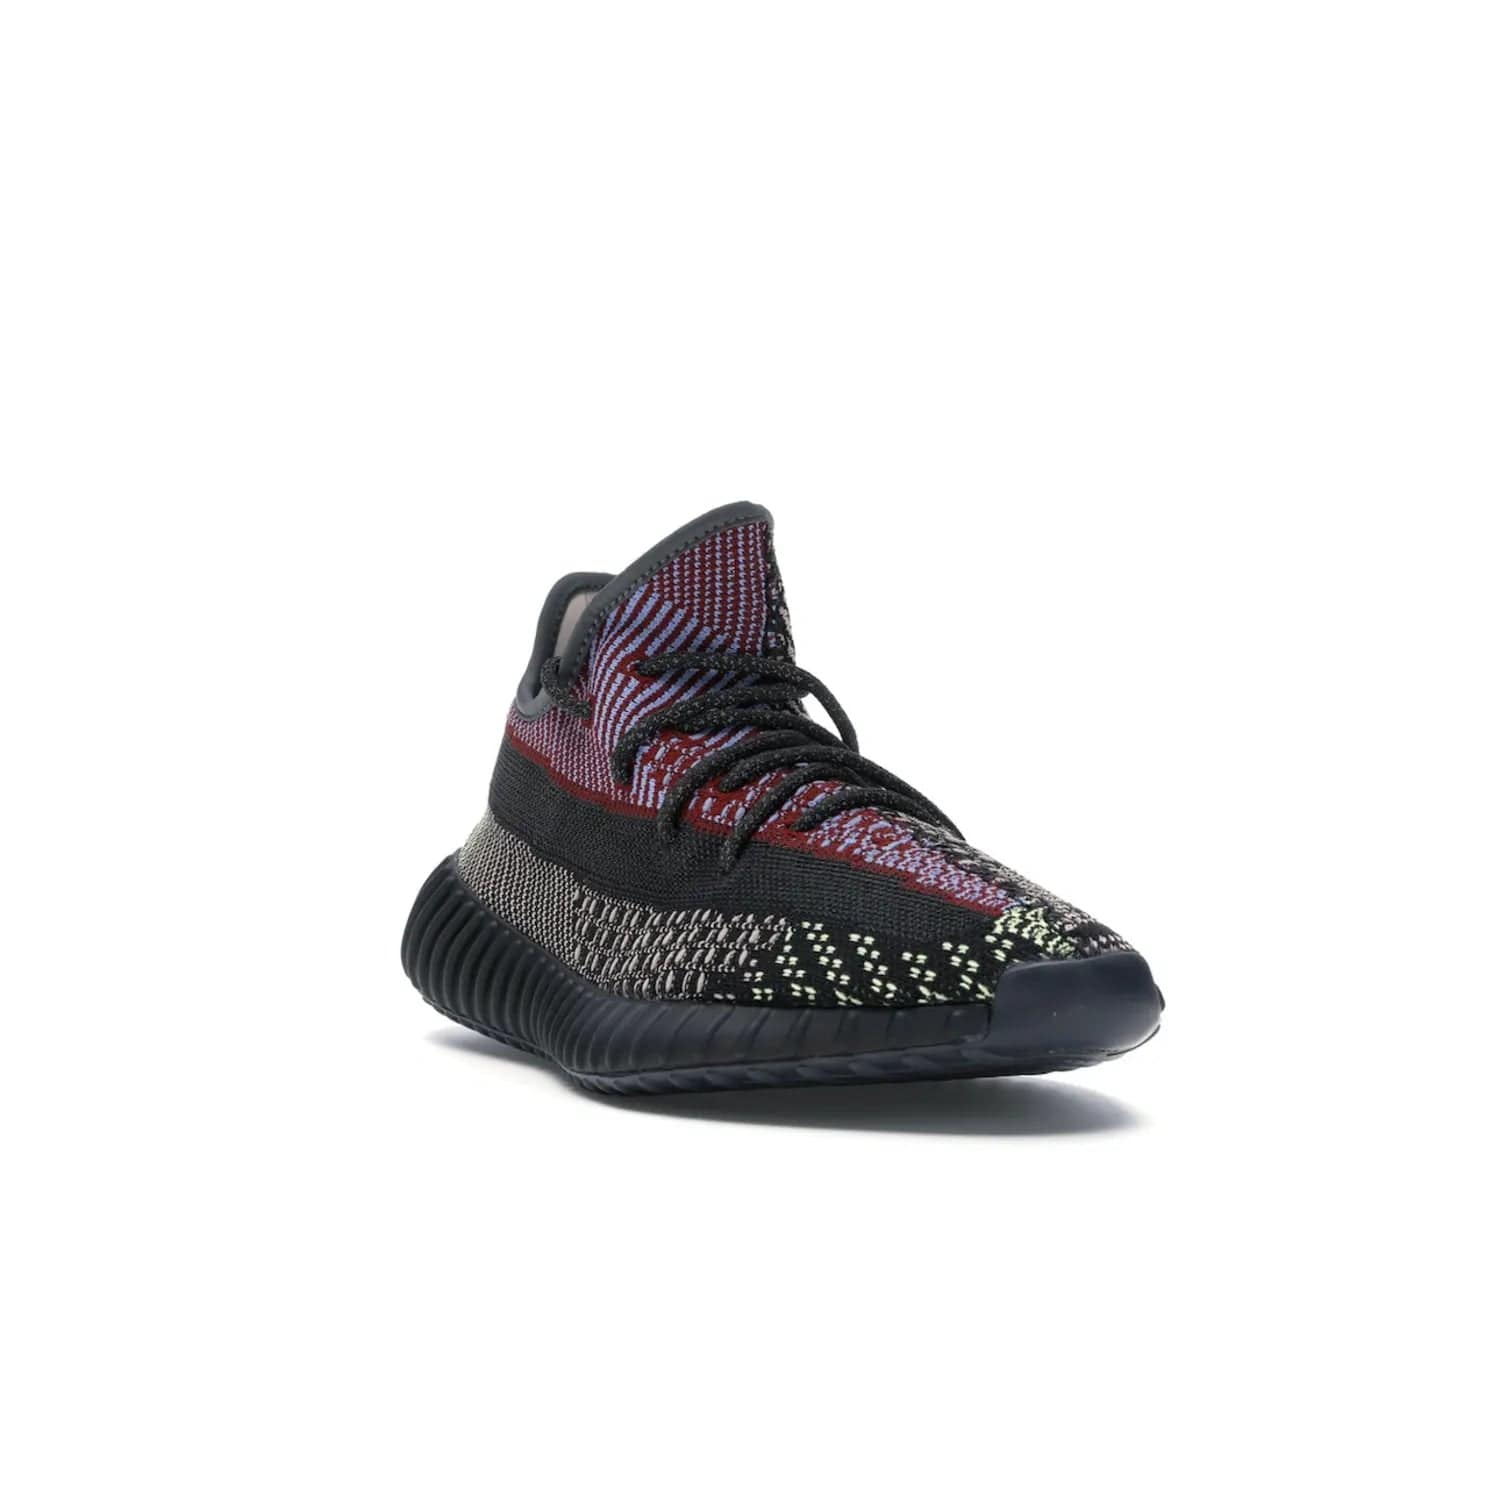 adidas Yeezy Boost 350 V2 Yecheil (Non-Reflective) - Image 7 - Only at www.BallersClubKickz.com - Make a statement with the eye-catching adidas Yeezy Boost 350 V2 Yecheil Non-Reflective. Featuring a spectrum of colorful hues, black upper, Boost cushioning, and black side stripe, the sneaker brings a luxe yet playful finish to any outfit.